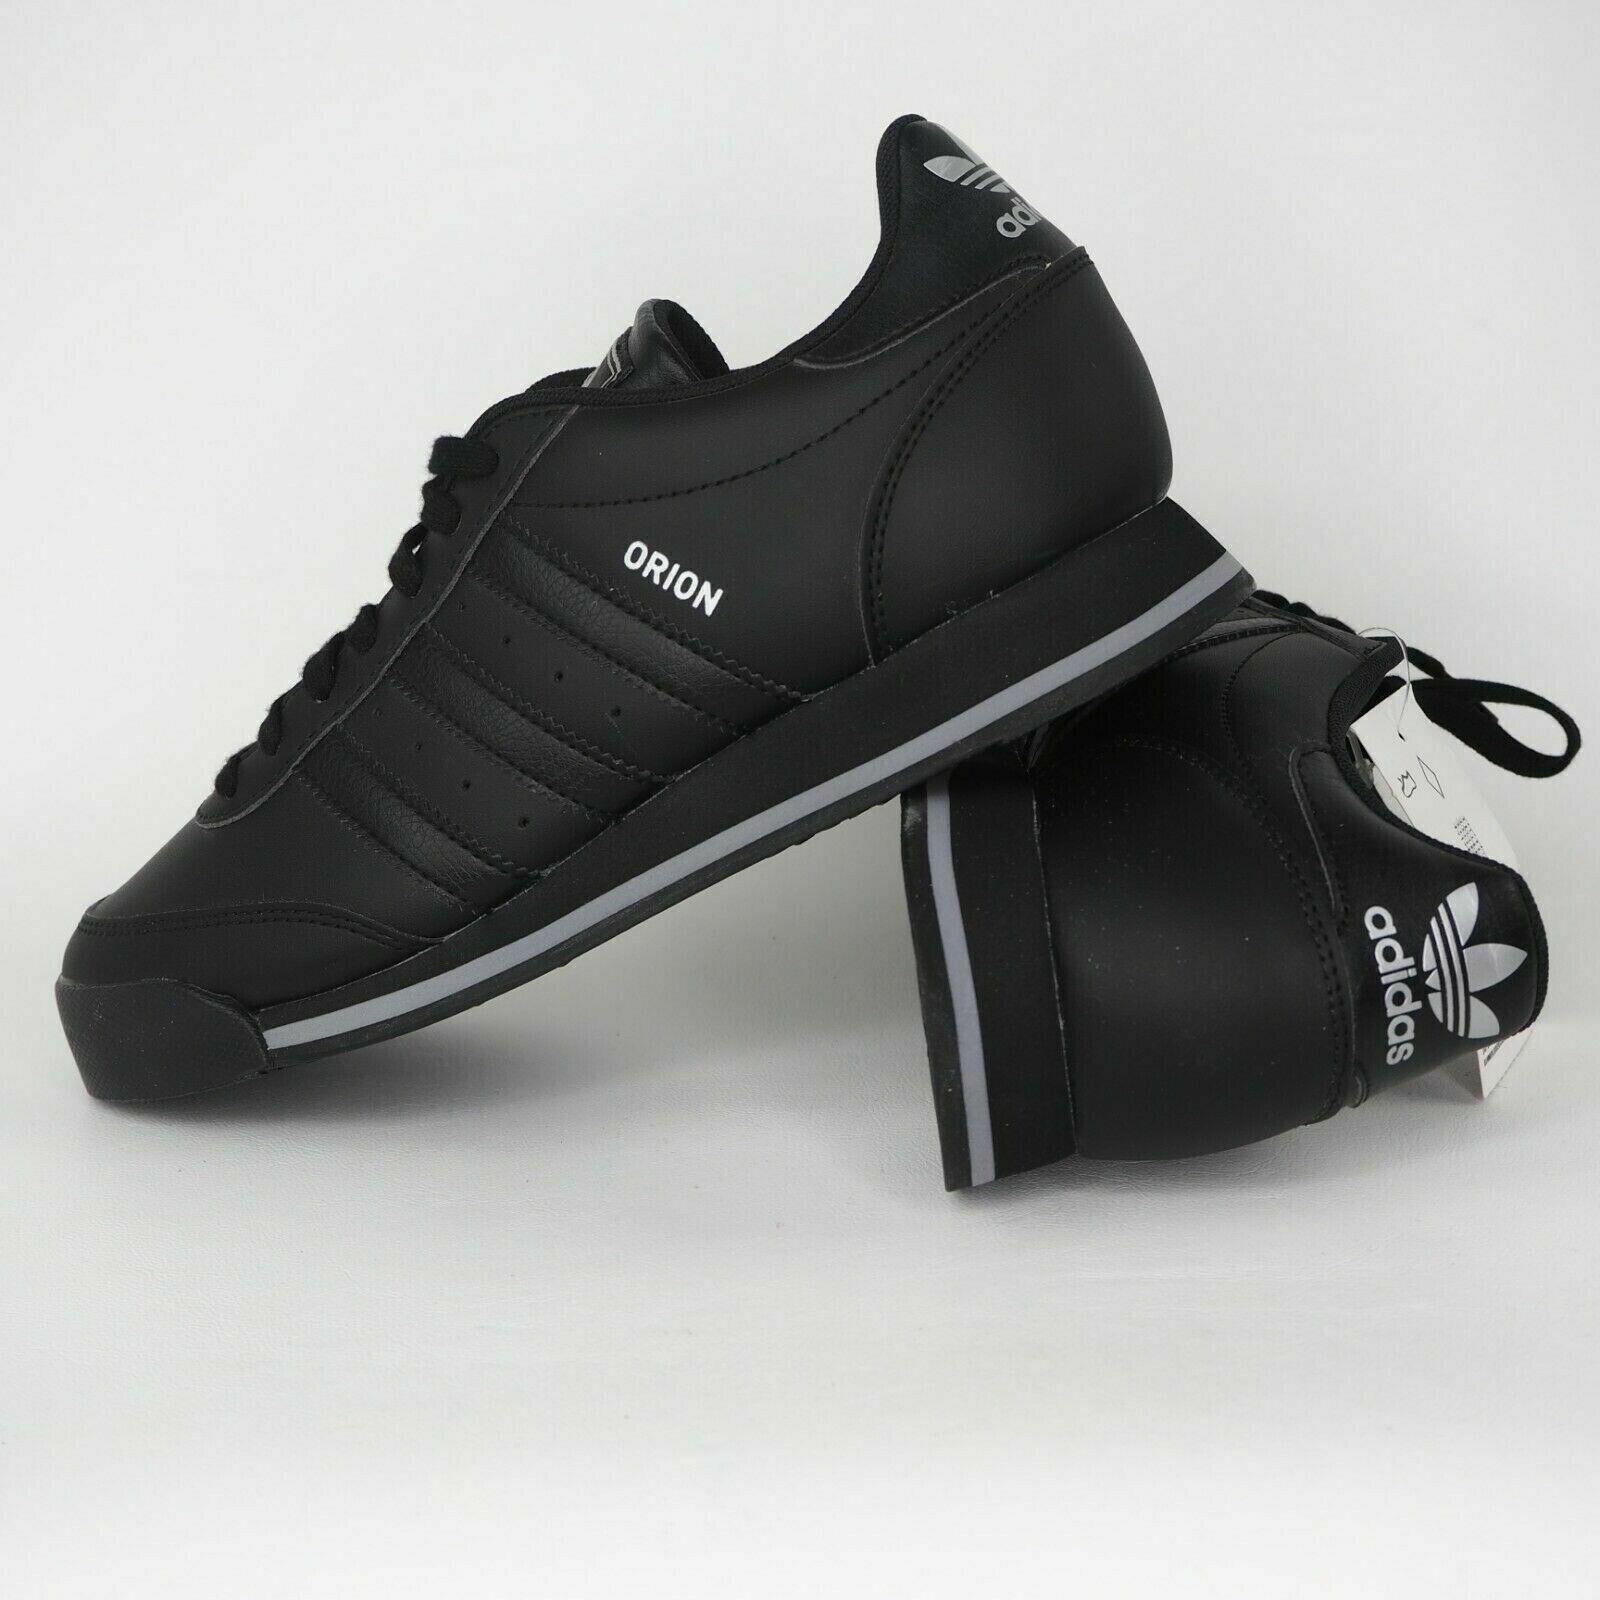 Adidas shoes Orion - Black 8